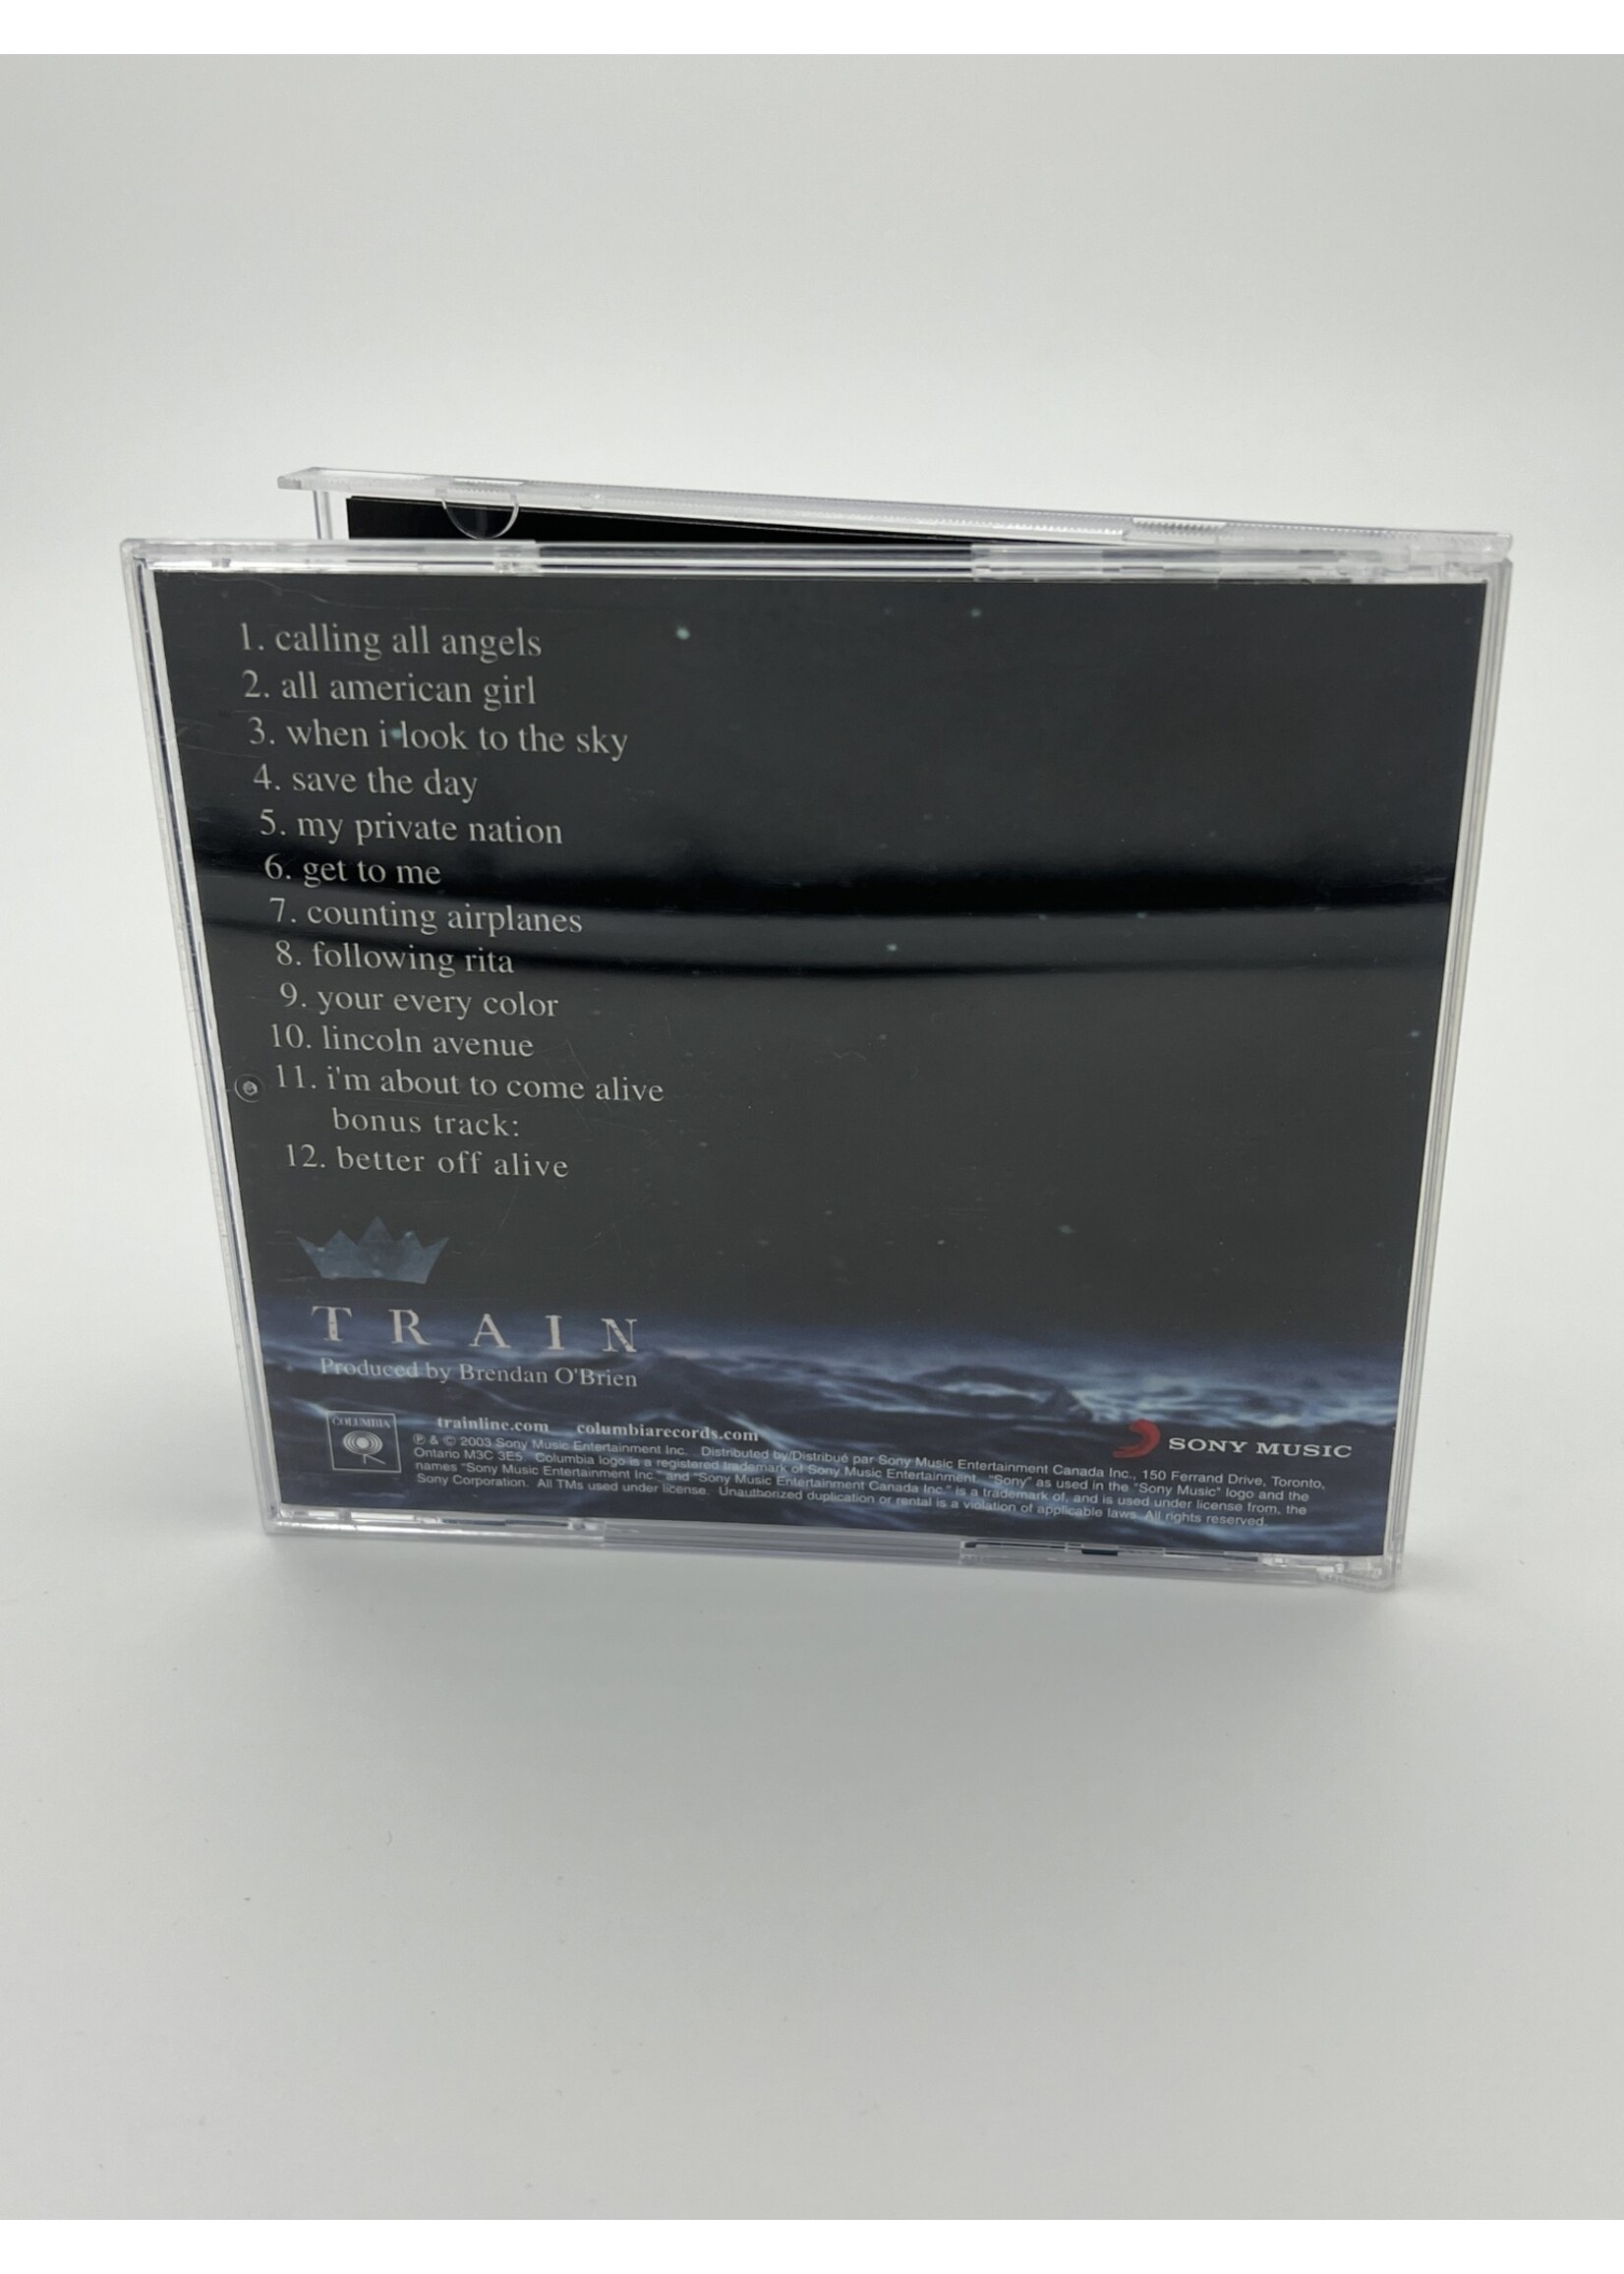 CD   Train My Private Nation CD